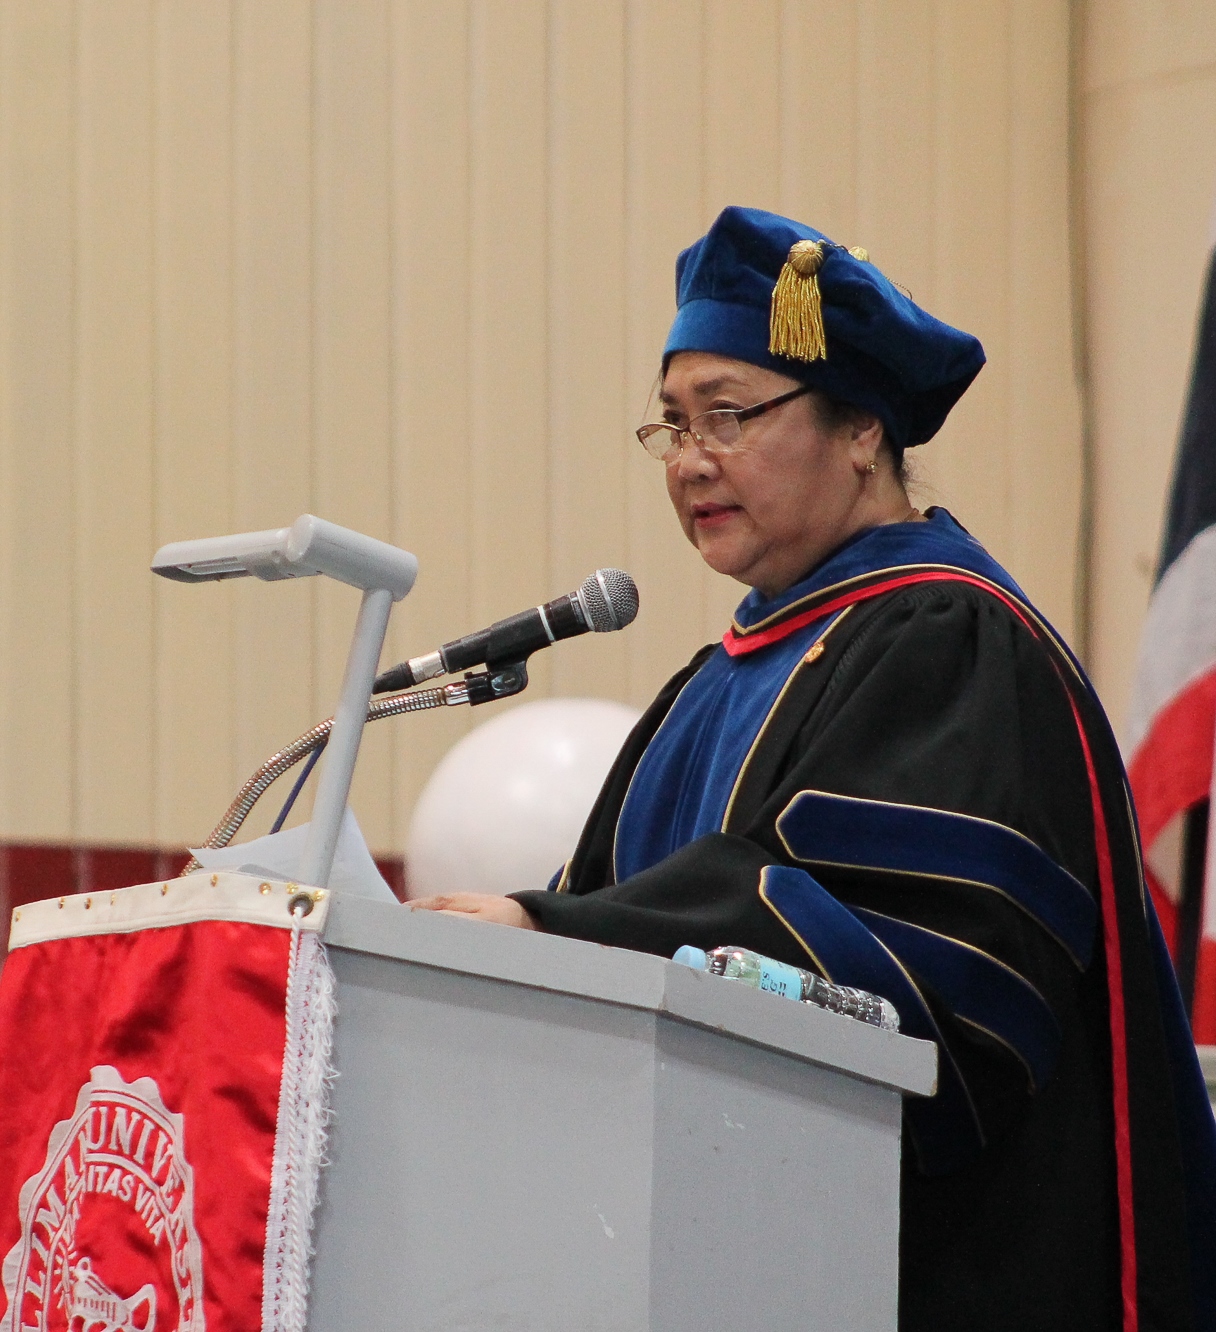 Dr. Tan to Graduates: ‘What Does the World Expect of a Silliman Graduate?’